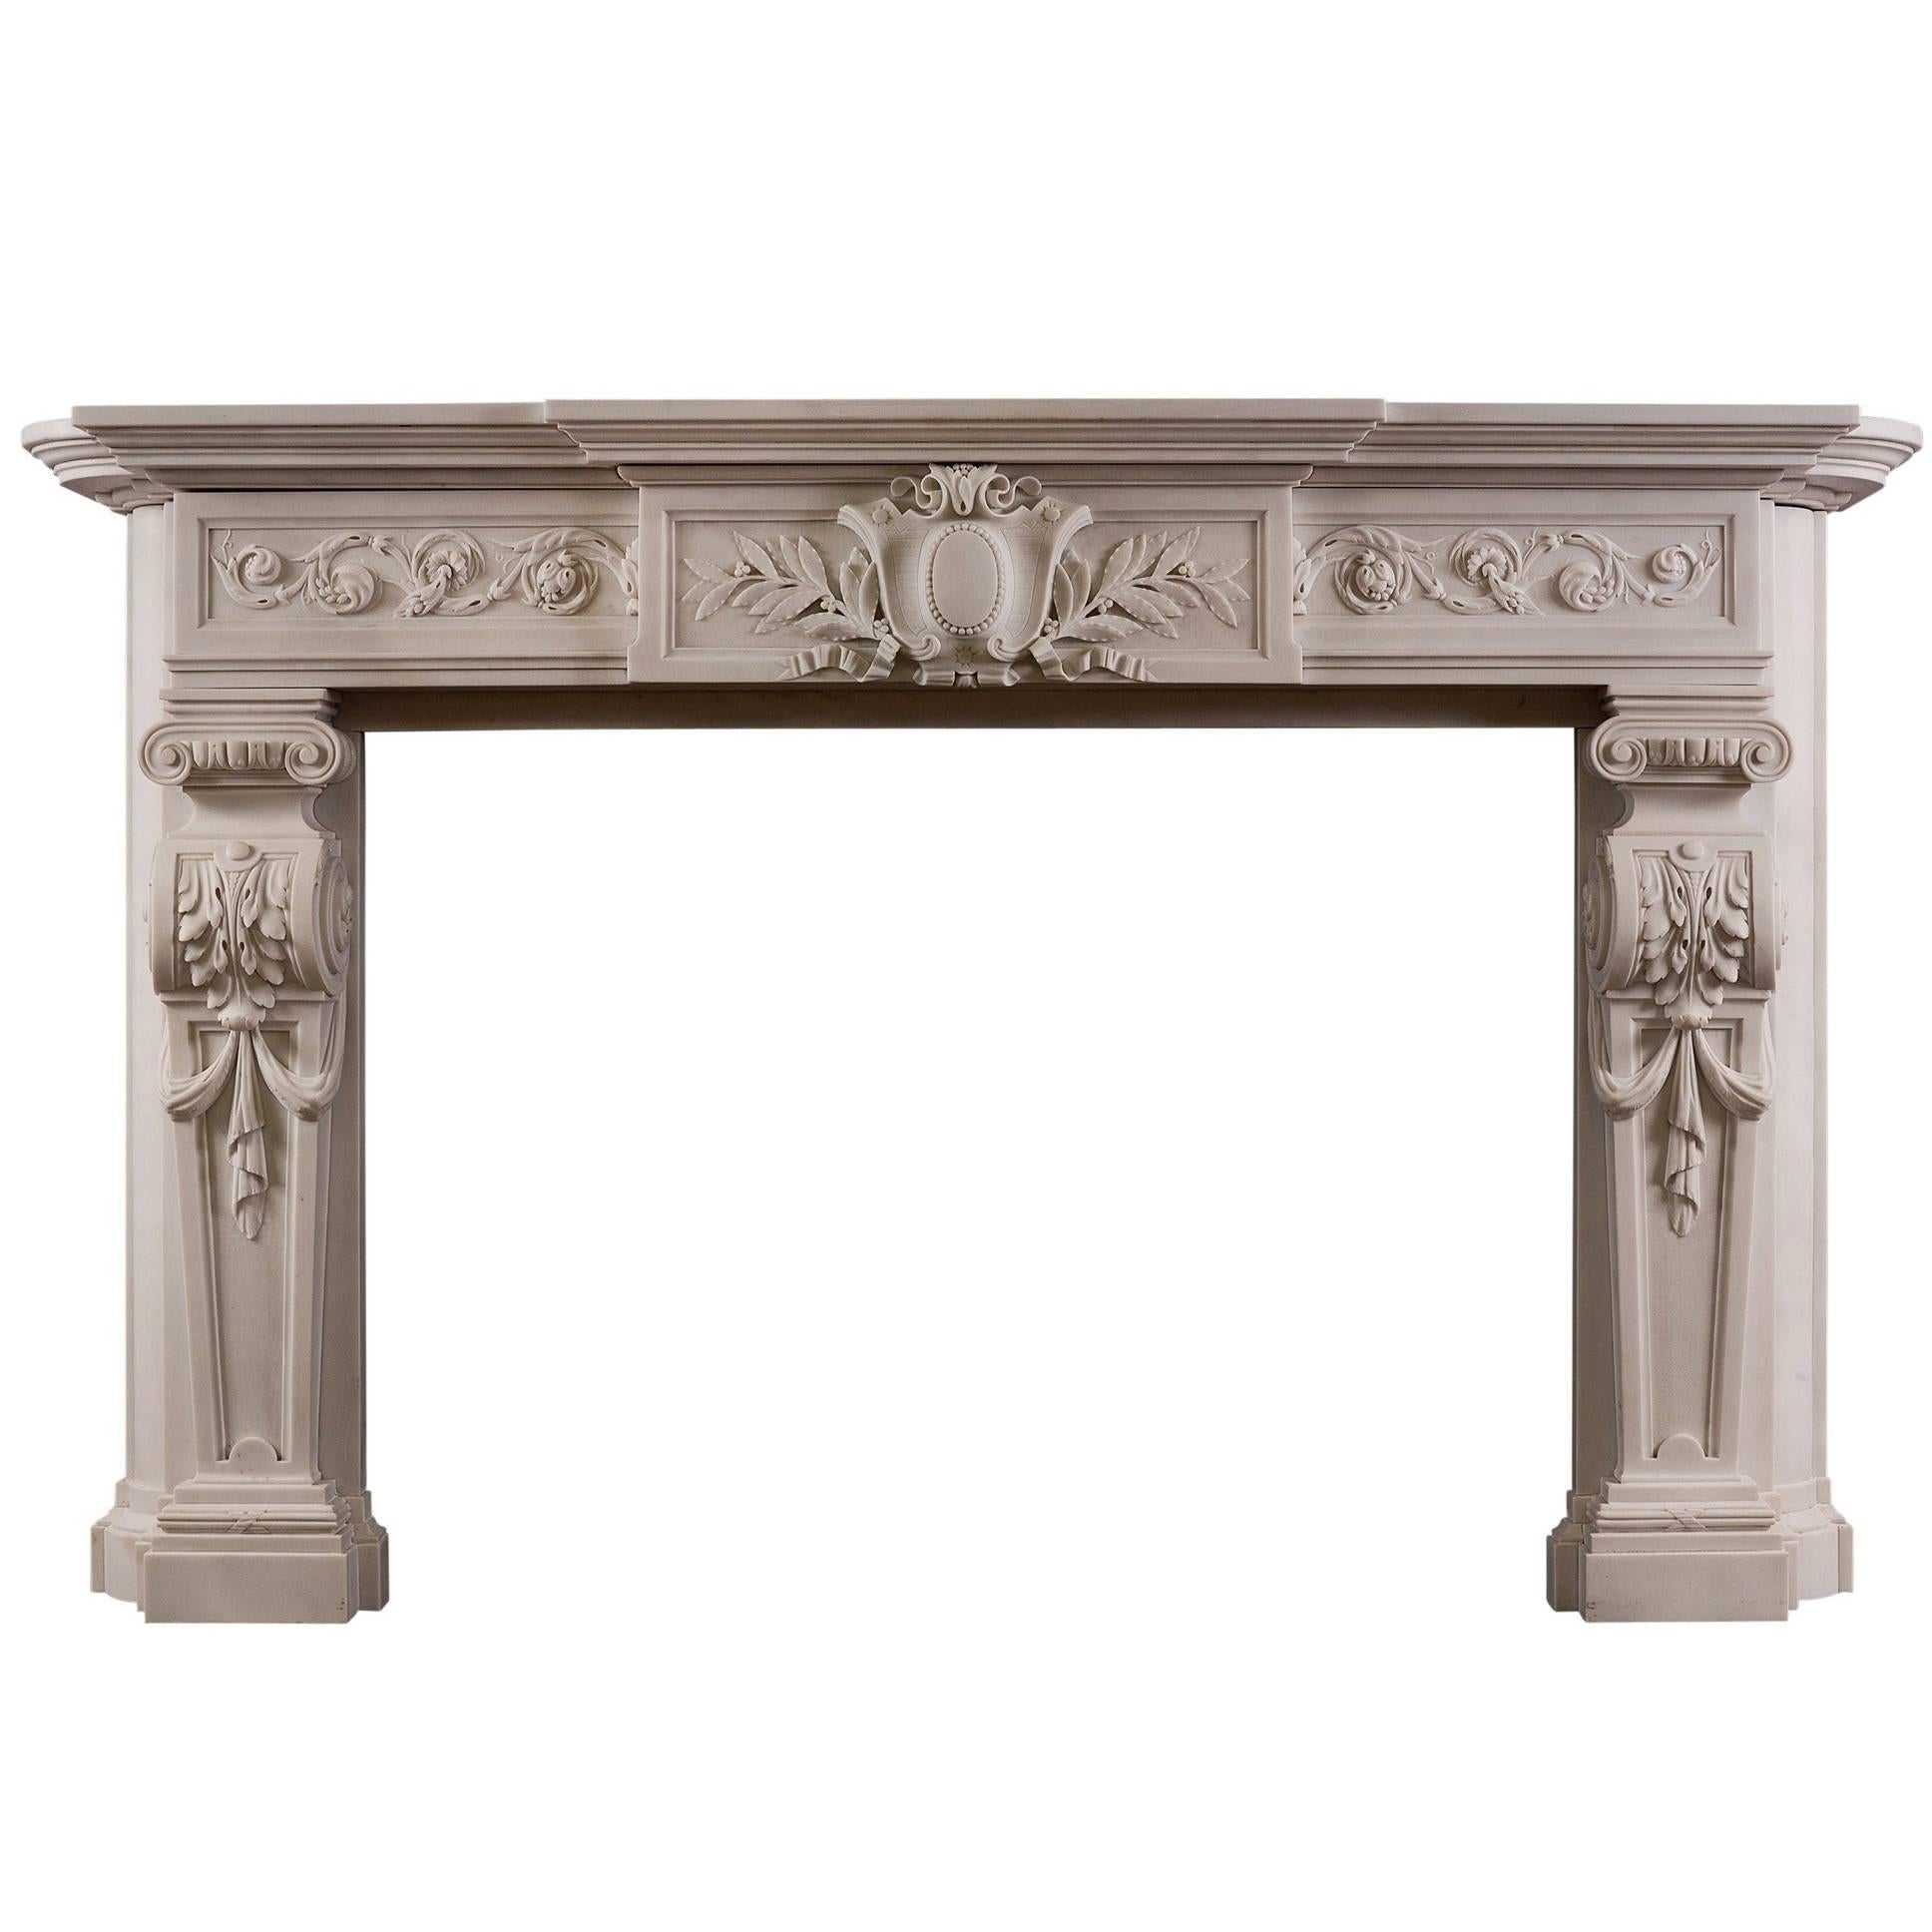 Large and Impressive French Statuary Marble Fireplace